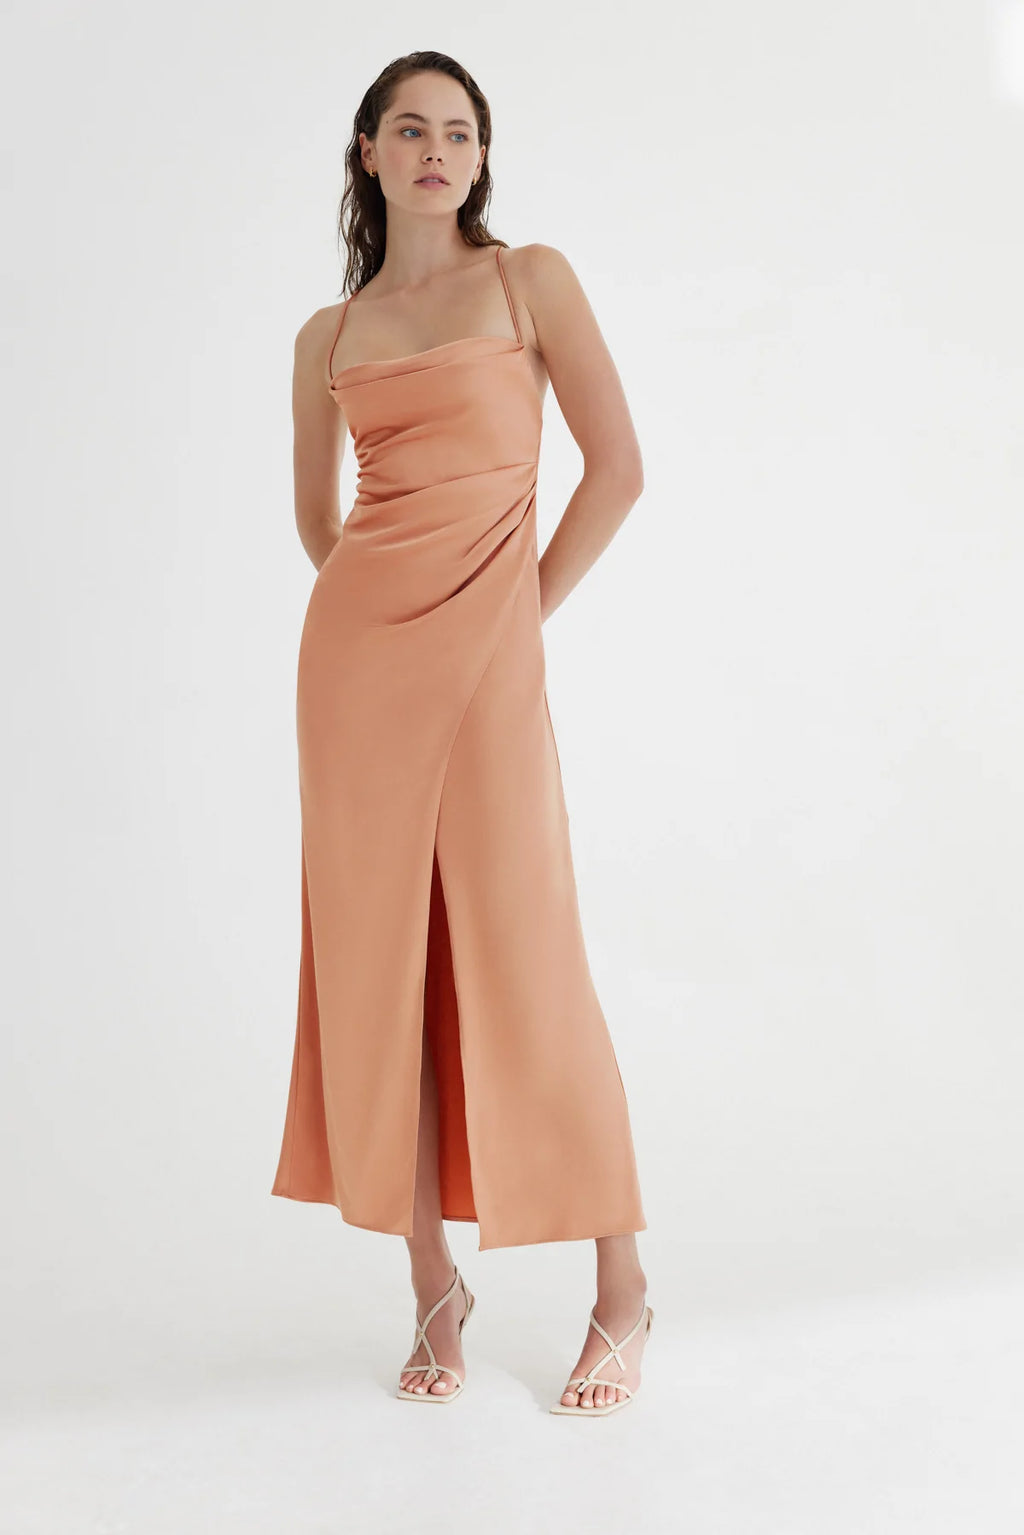 Significant Other - Amelie Dress - Caramel